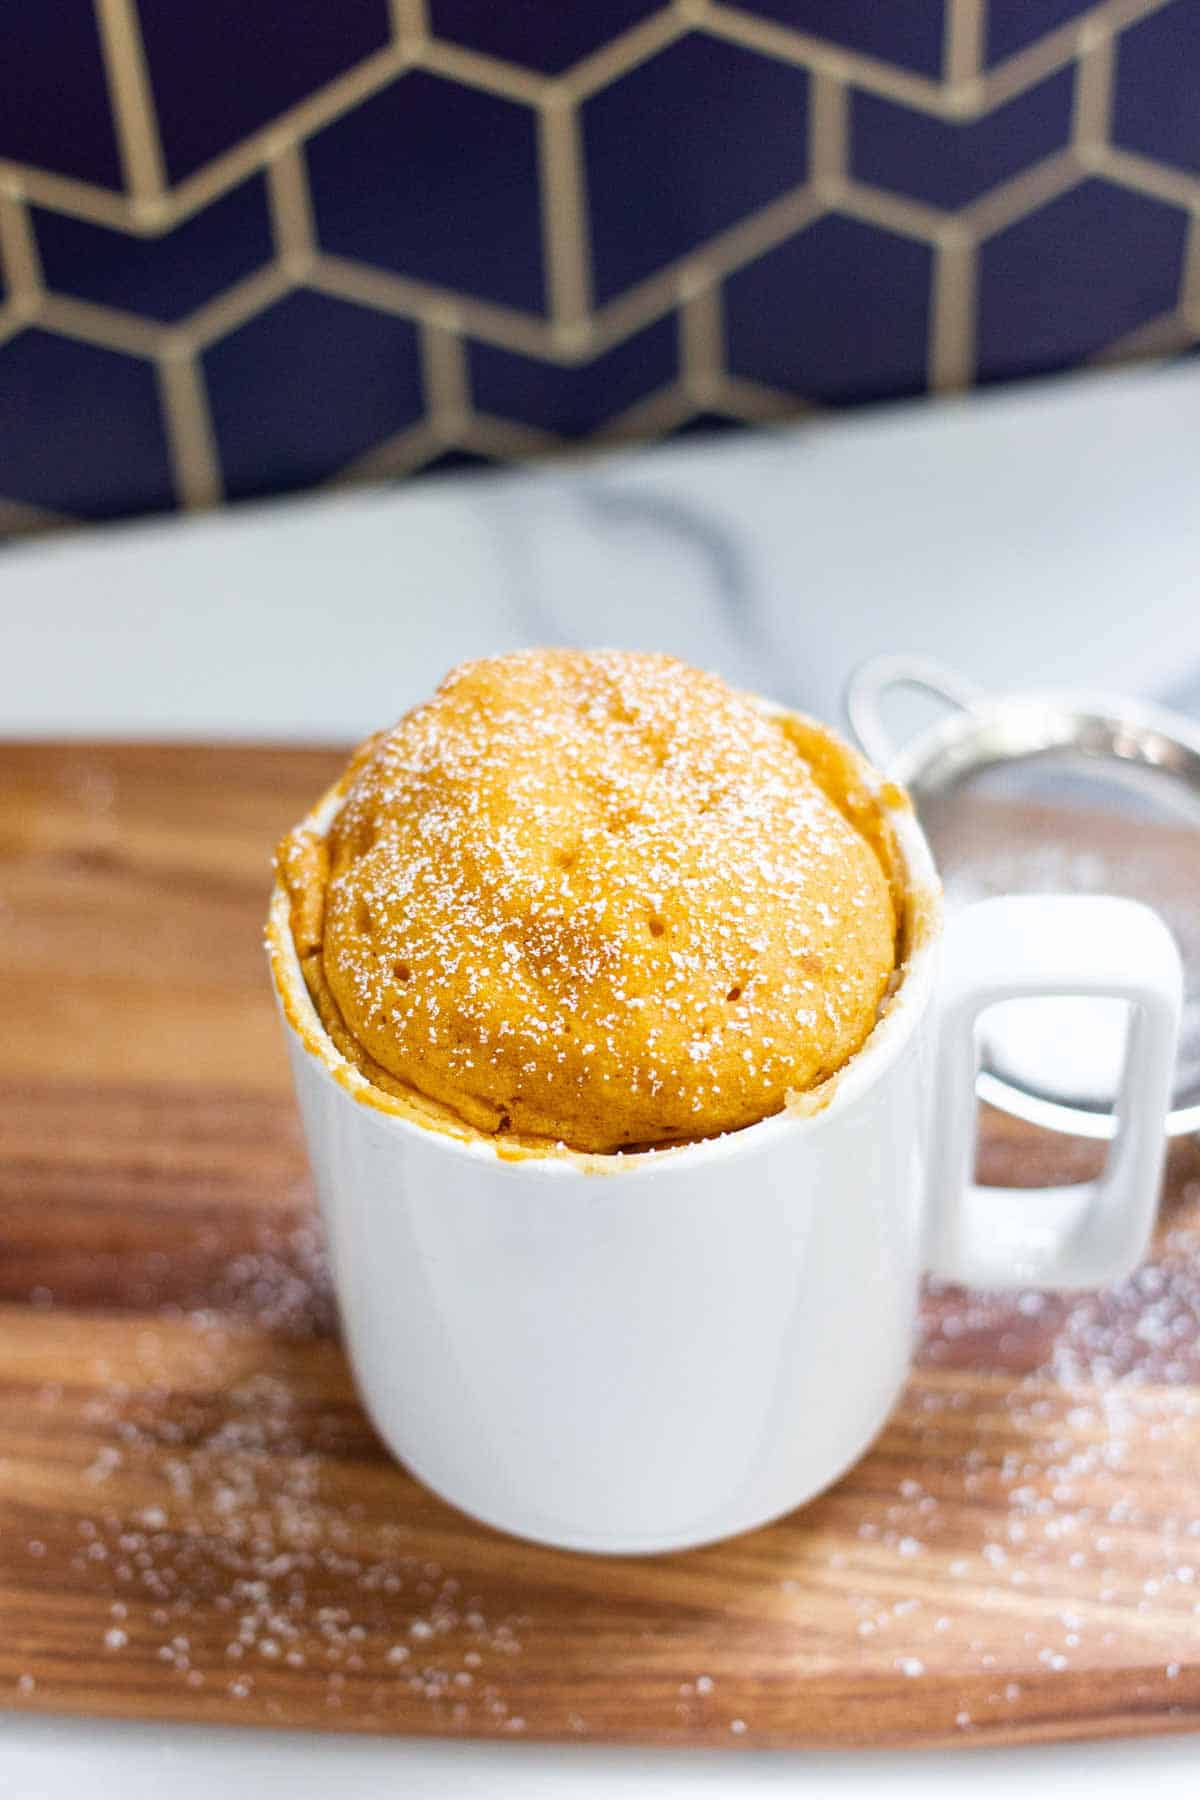 Pumpkin spice mug cake cooled and dusted with powdered sugar.